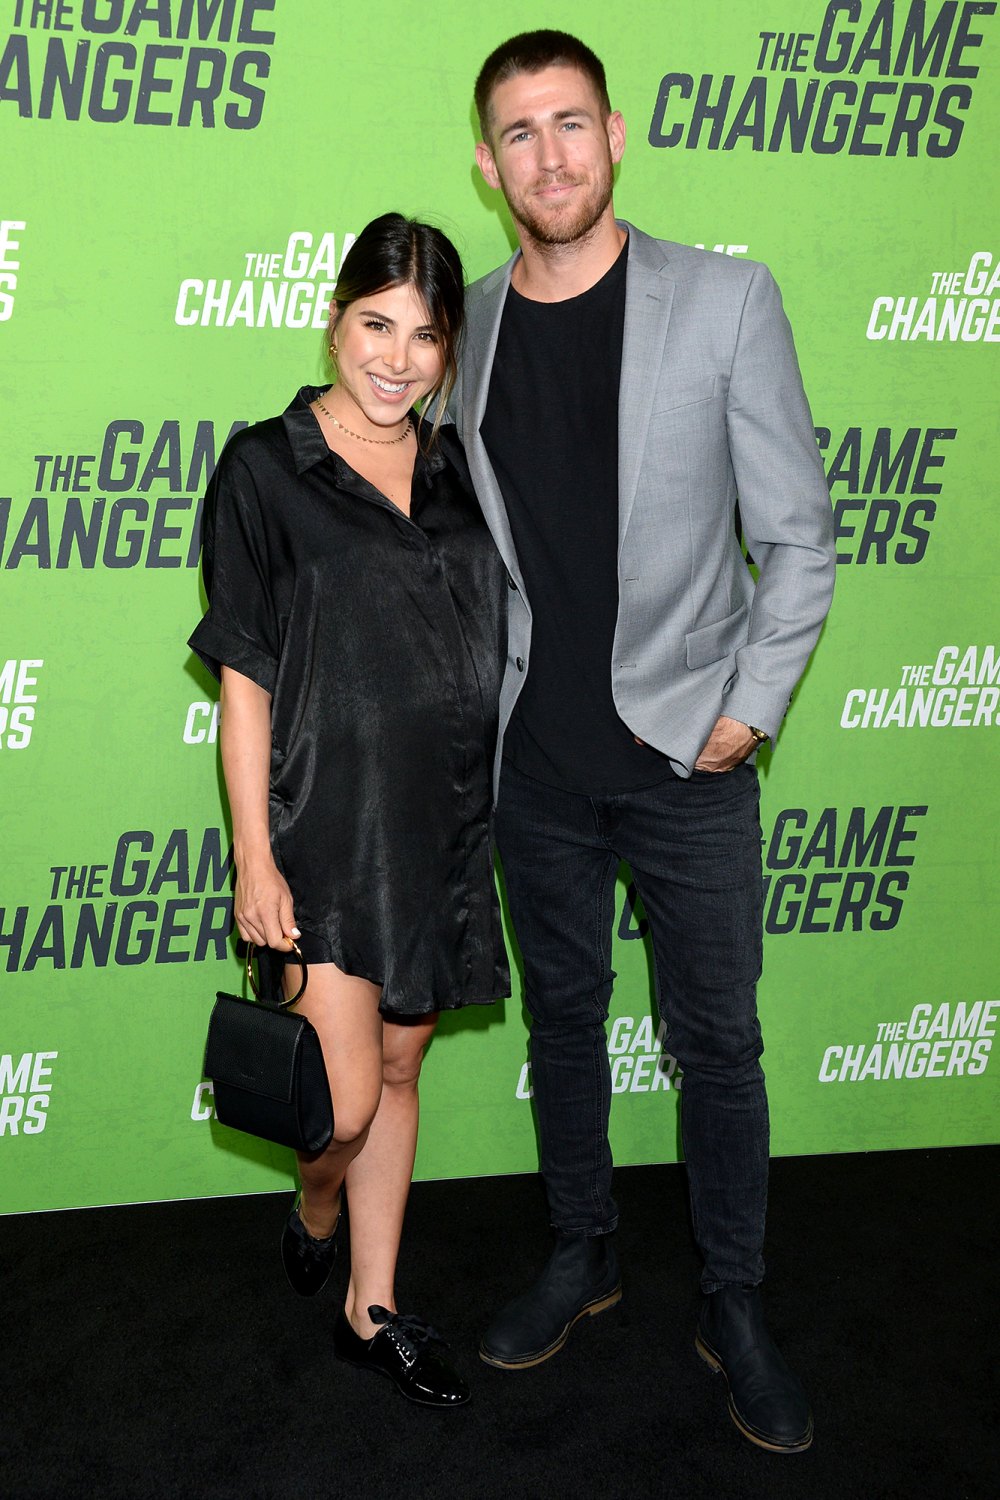 They Do! Victorious’ Daniella Monet and Fiance Andrew Gardner Are Married